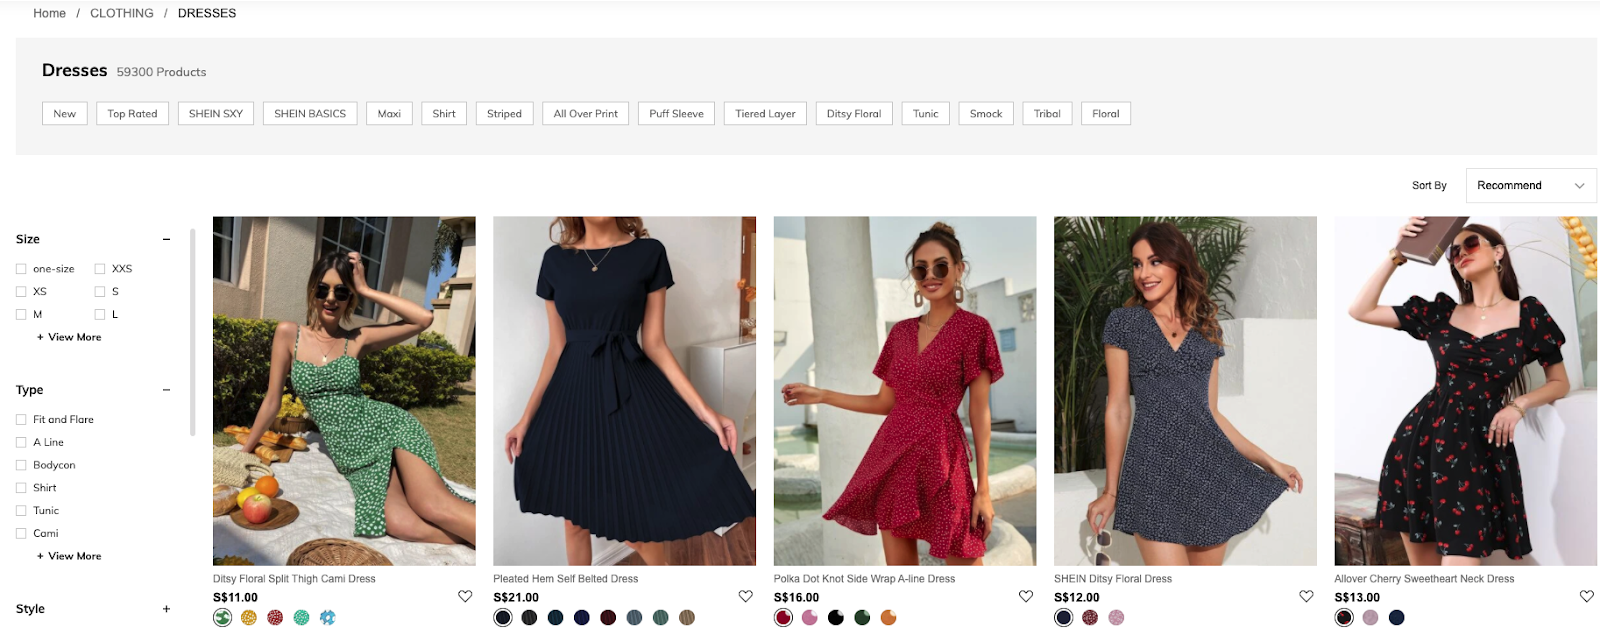 shein product page